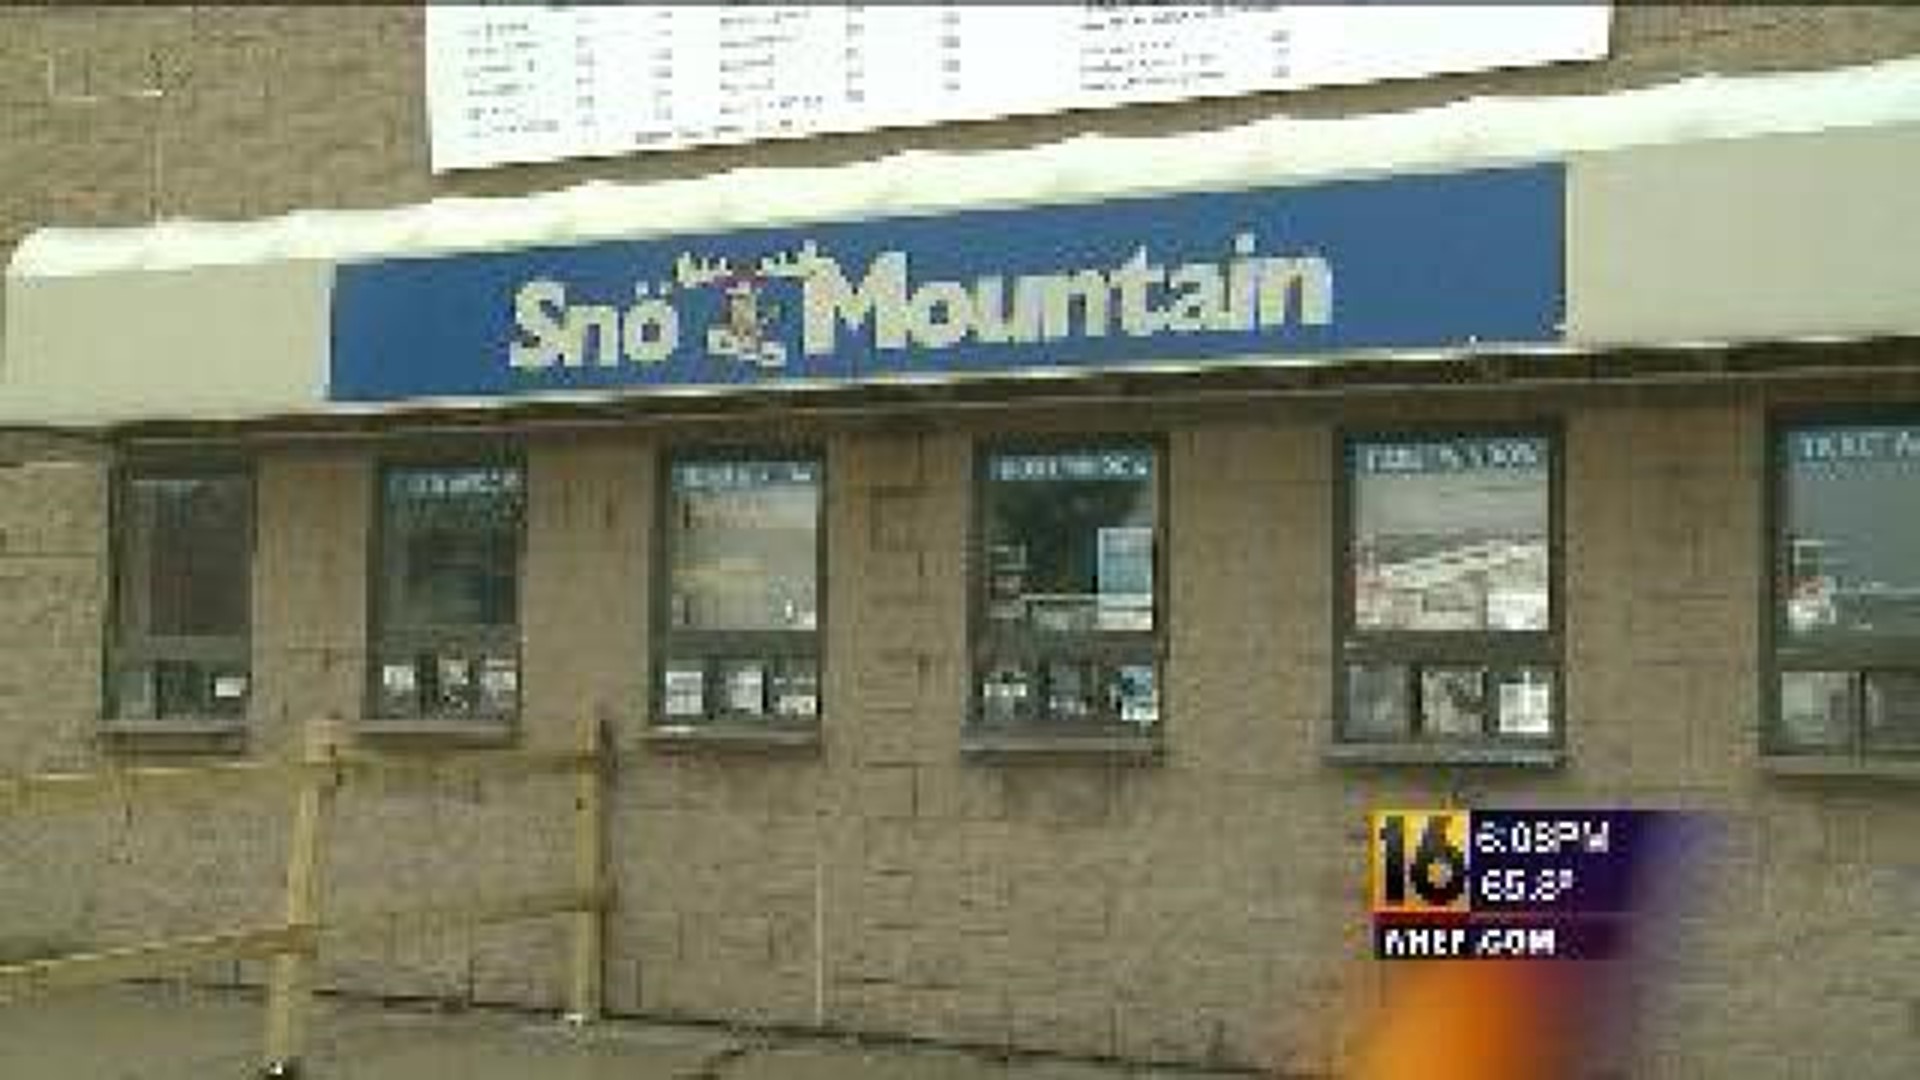 Sno Mountain Now in Bankruptcy